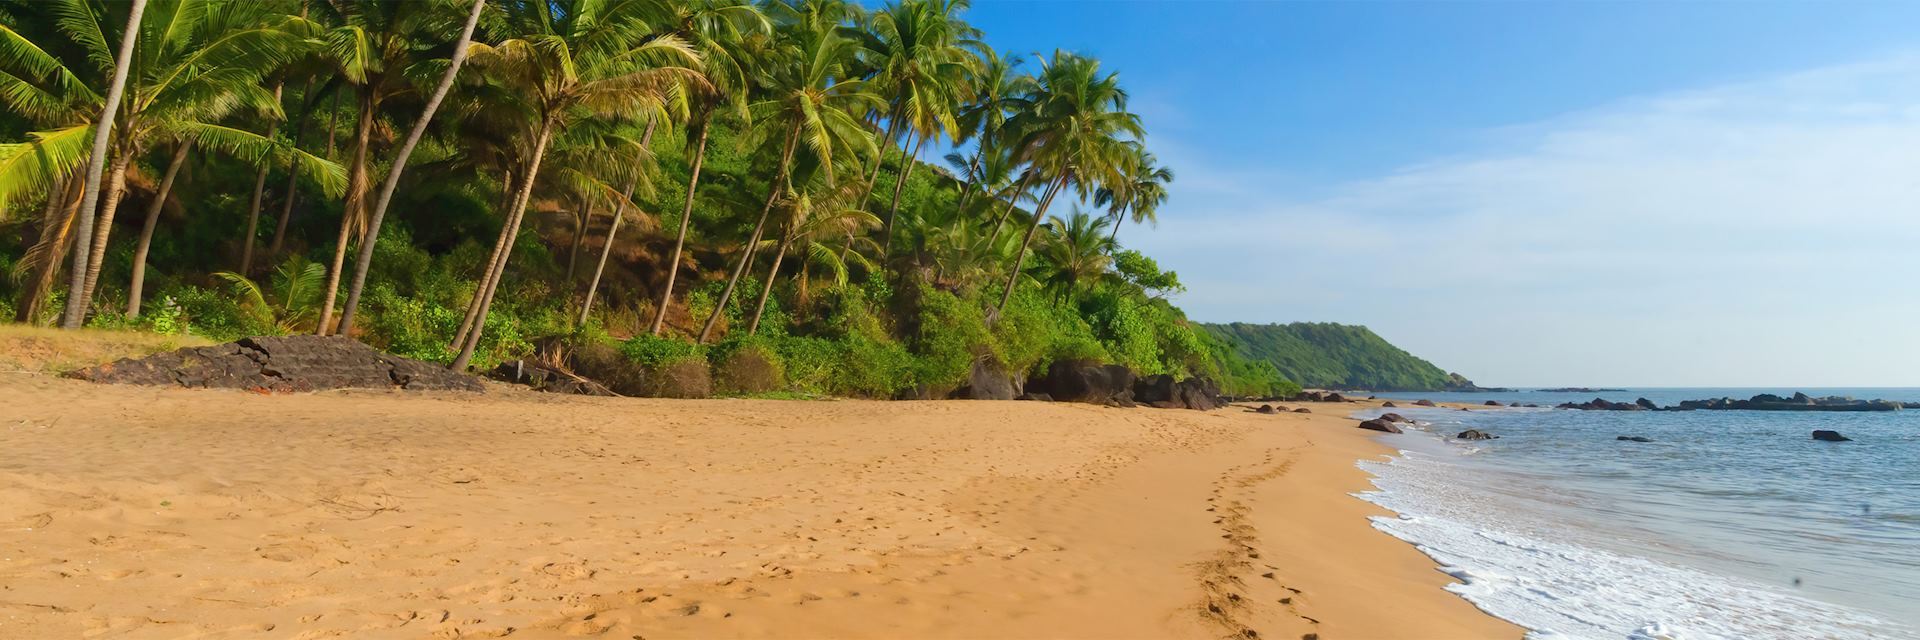 https://media.audleytravel.com/-/media/images/home/indian-subcontinent/india/places/istock_44978654_india_goa_beach_letterbox.jpg?q=79&w=1920&h=640